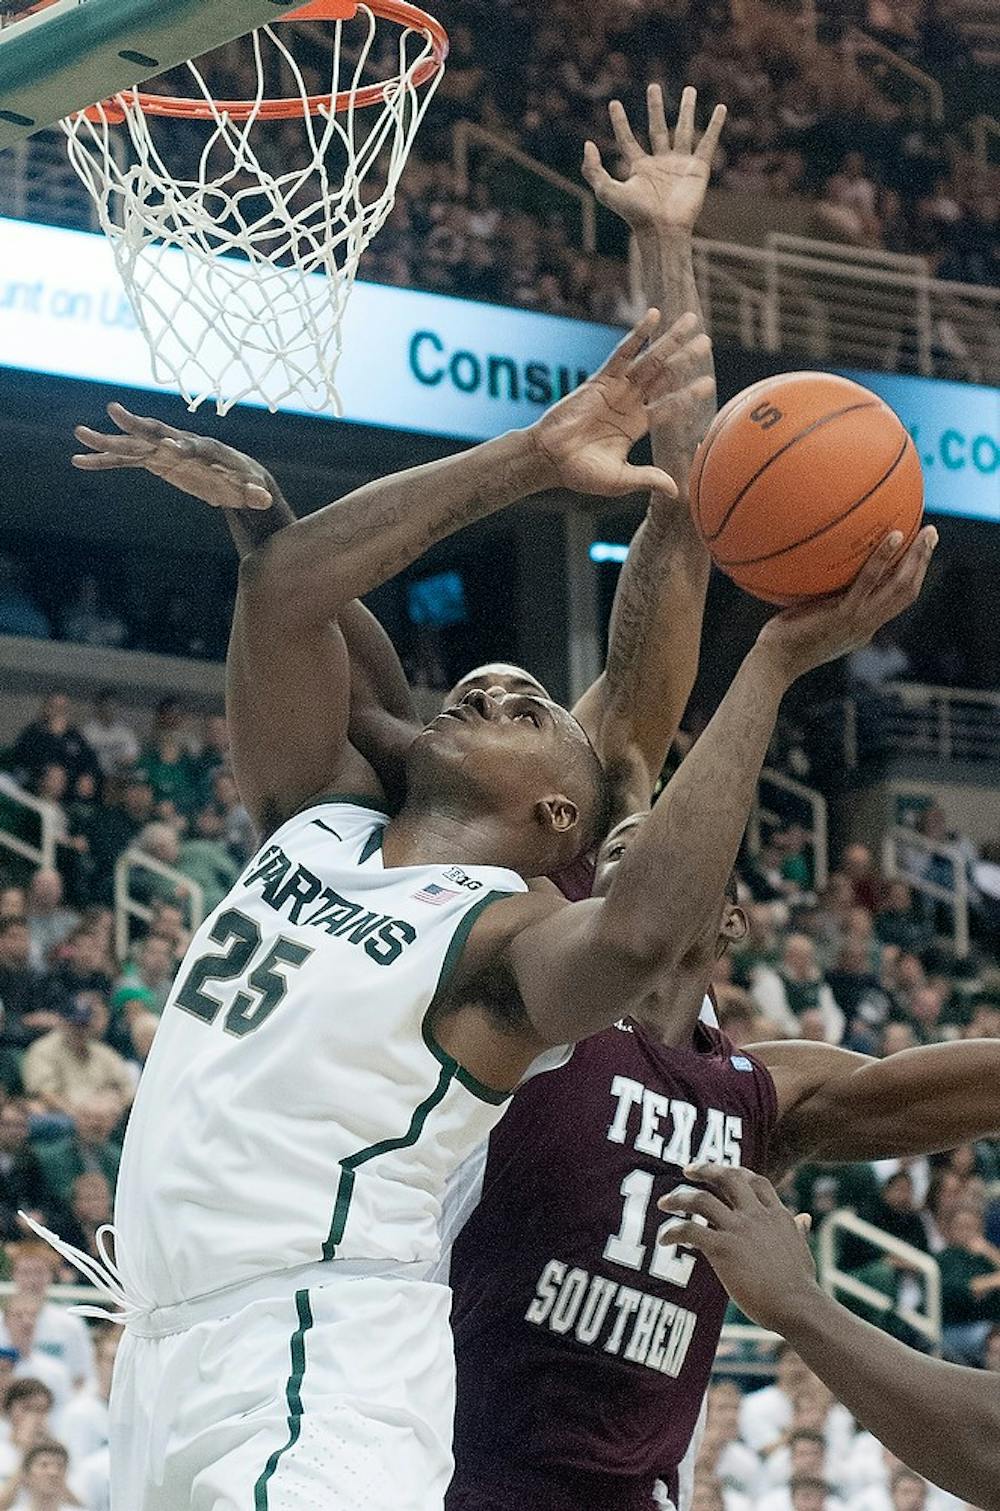 	<p>Senior center Derrick Nix goes for a layup during the game against Texas Southern on Nov. 18, 2012, at Breslin Center. The Spartans beat the Tigers 69-41. Natalie Kolb/The State News</p>